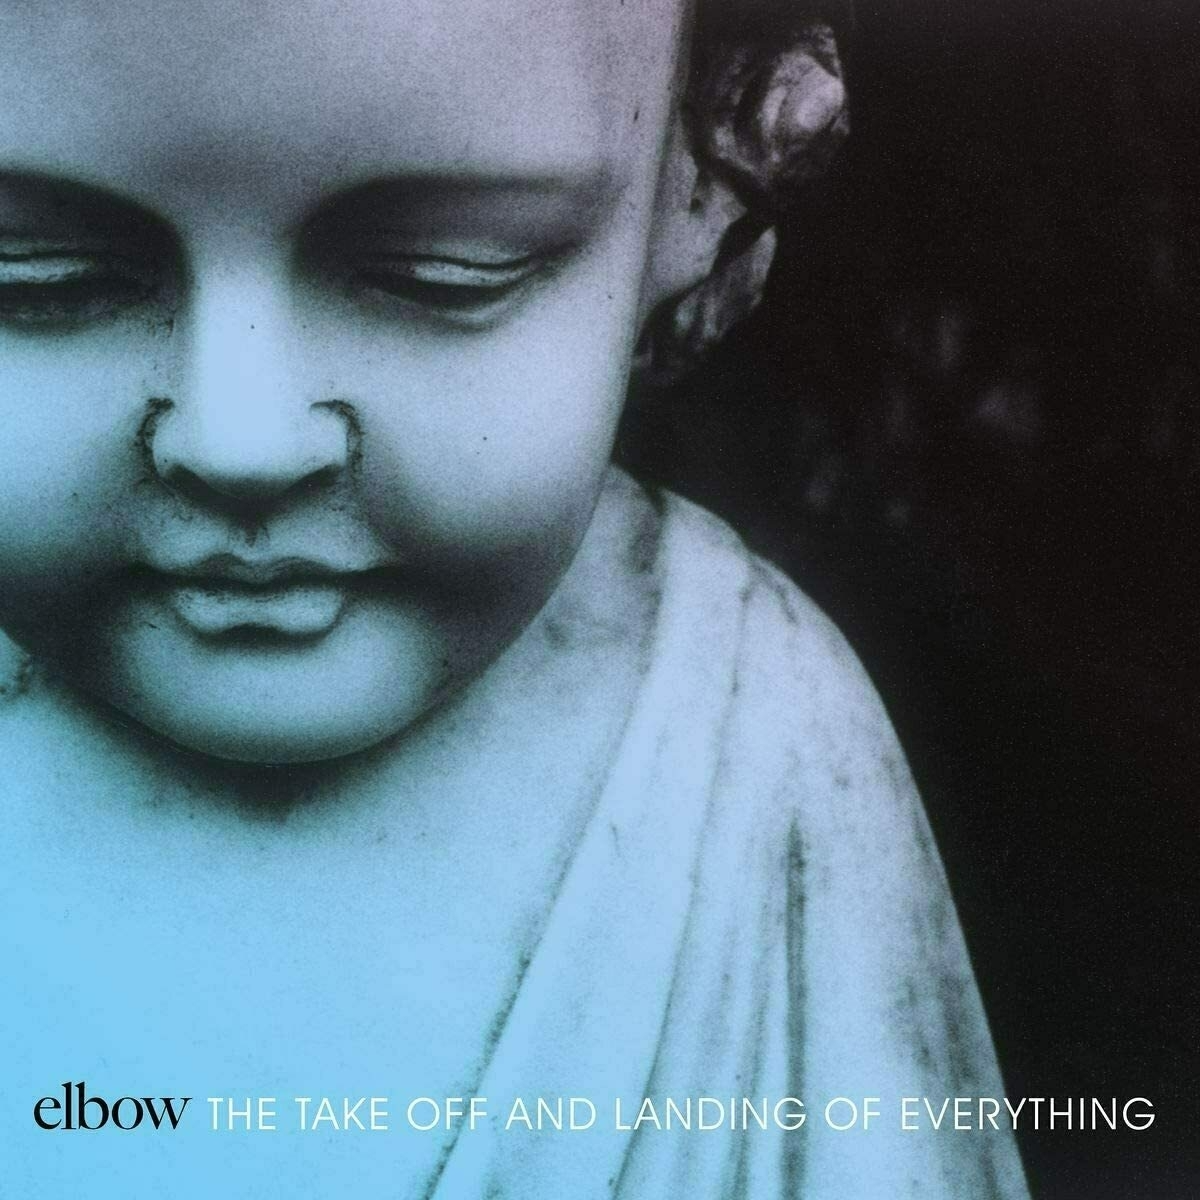 Elbow - The Takeoff & Landing of Everything - one of my top 12 go-to albums